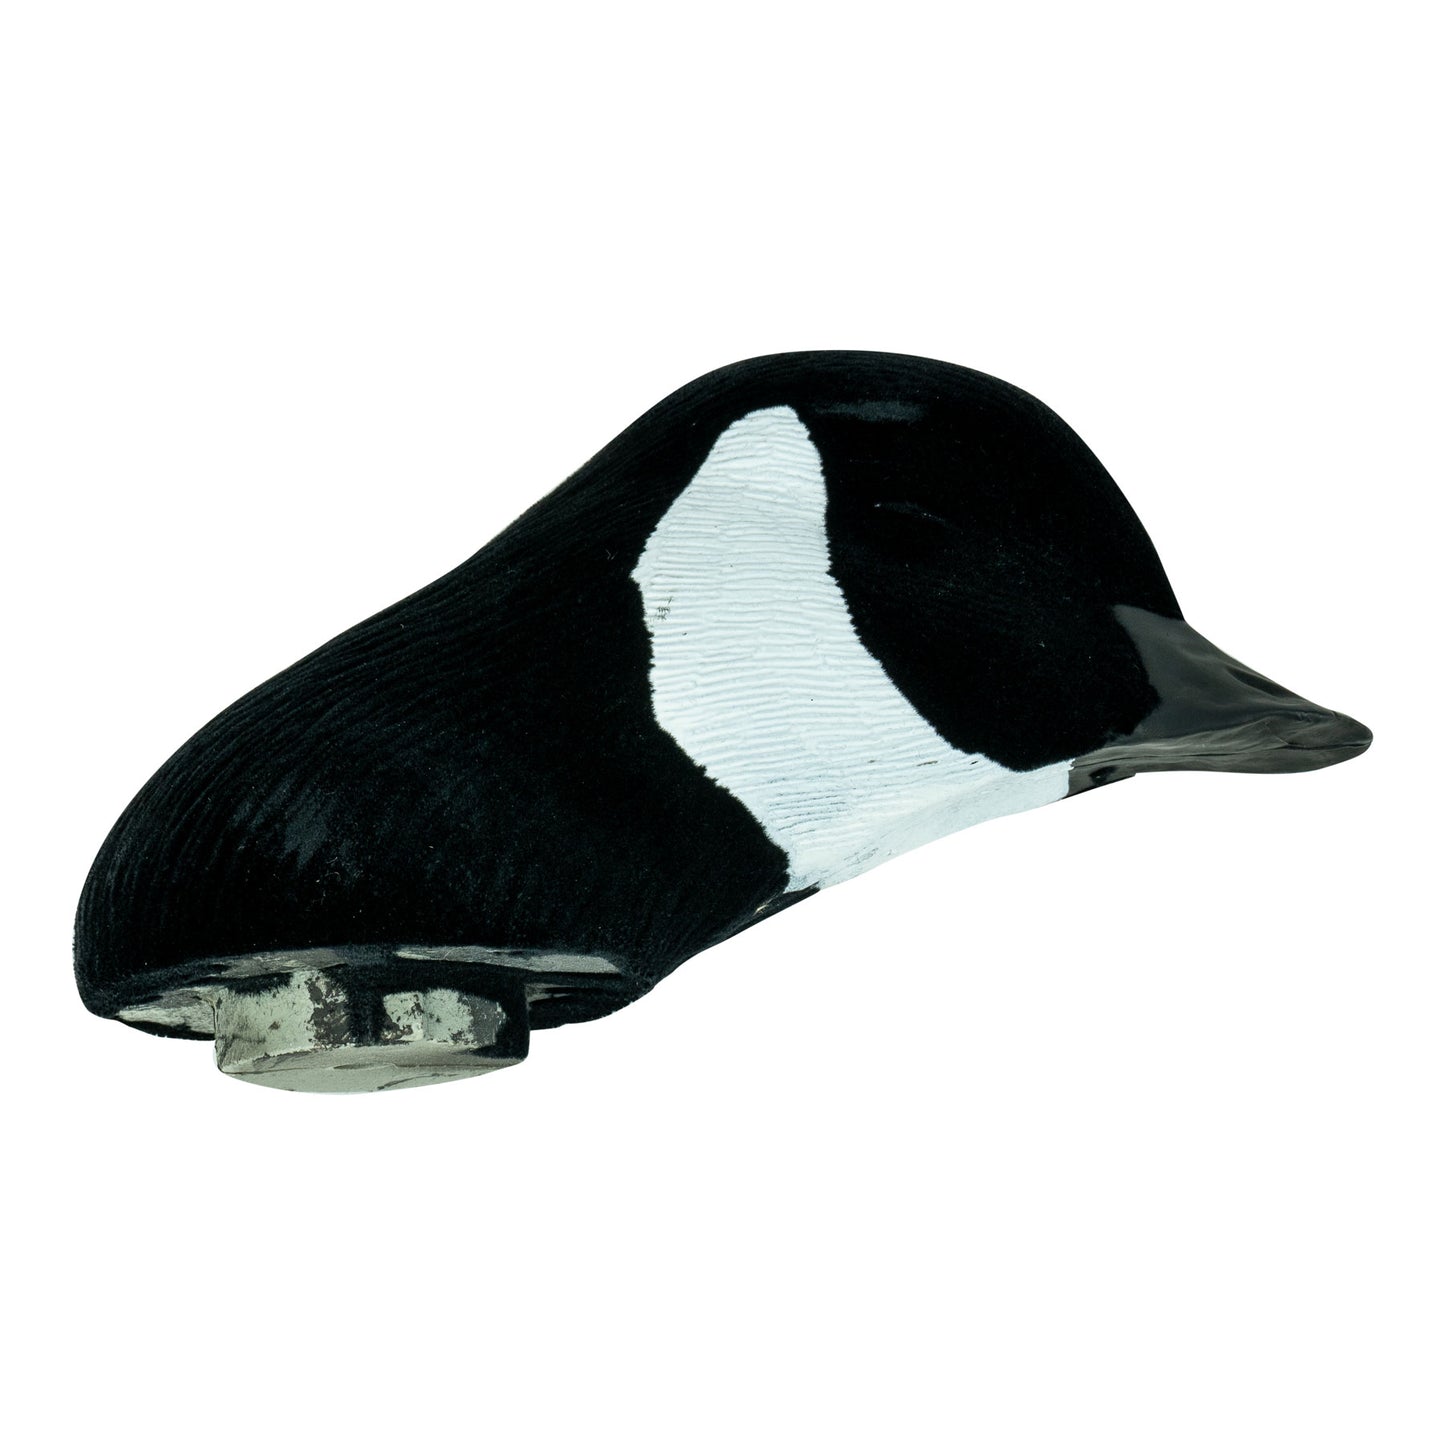 Pro Series Floater Canada Goose Sleeper Heads - 4 Heads